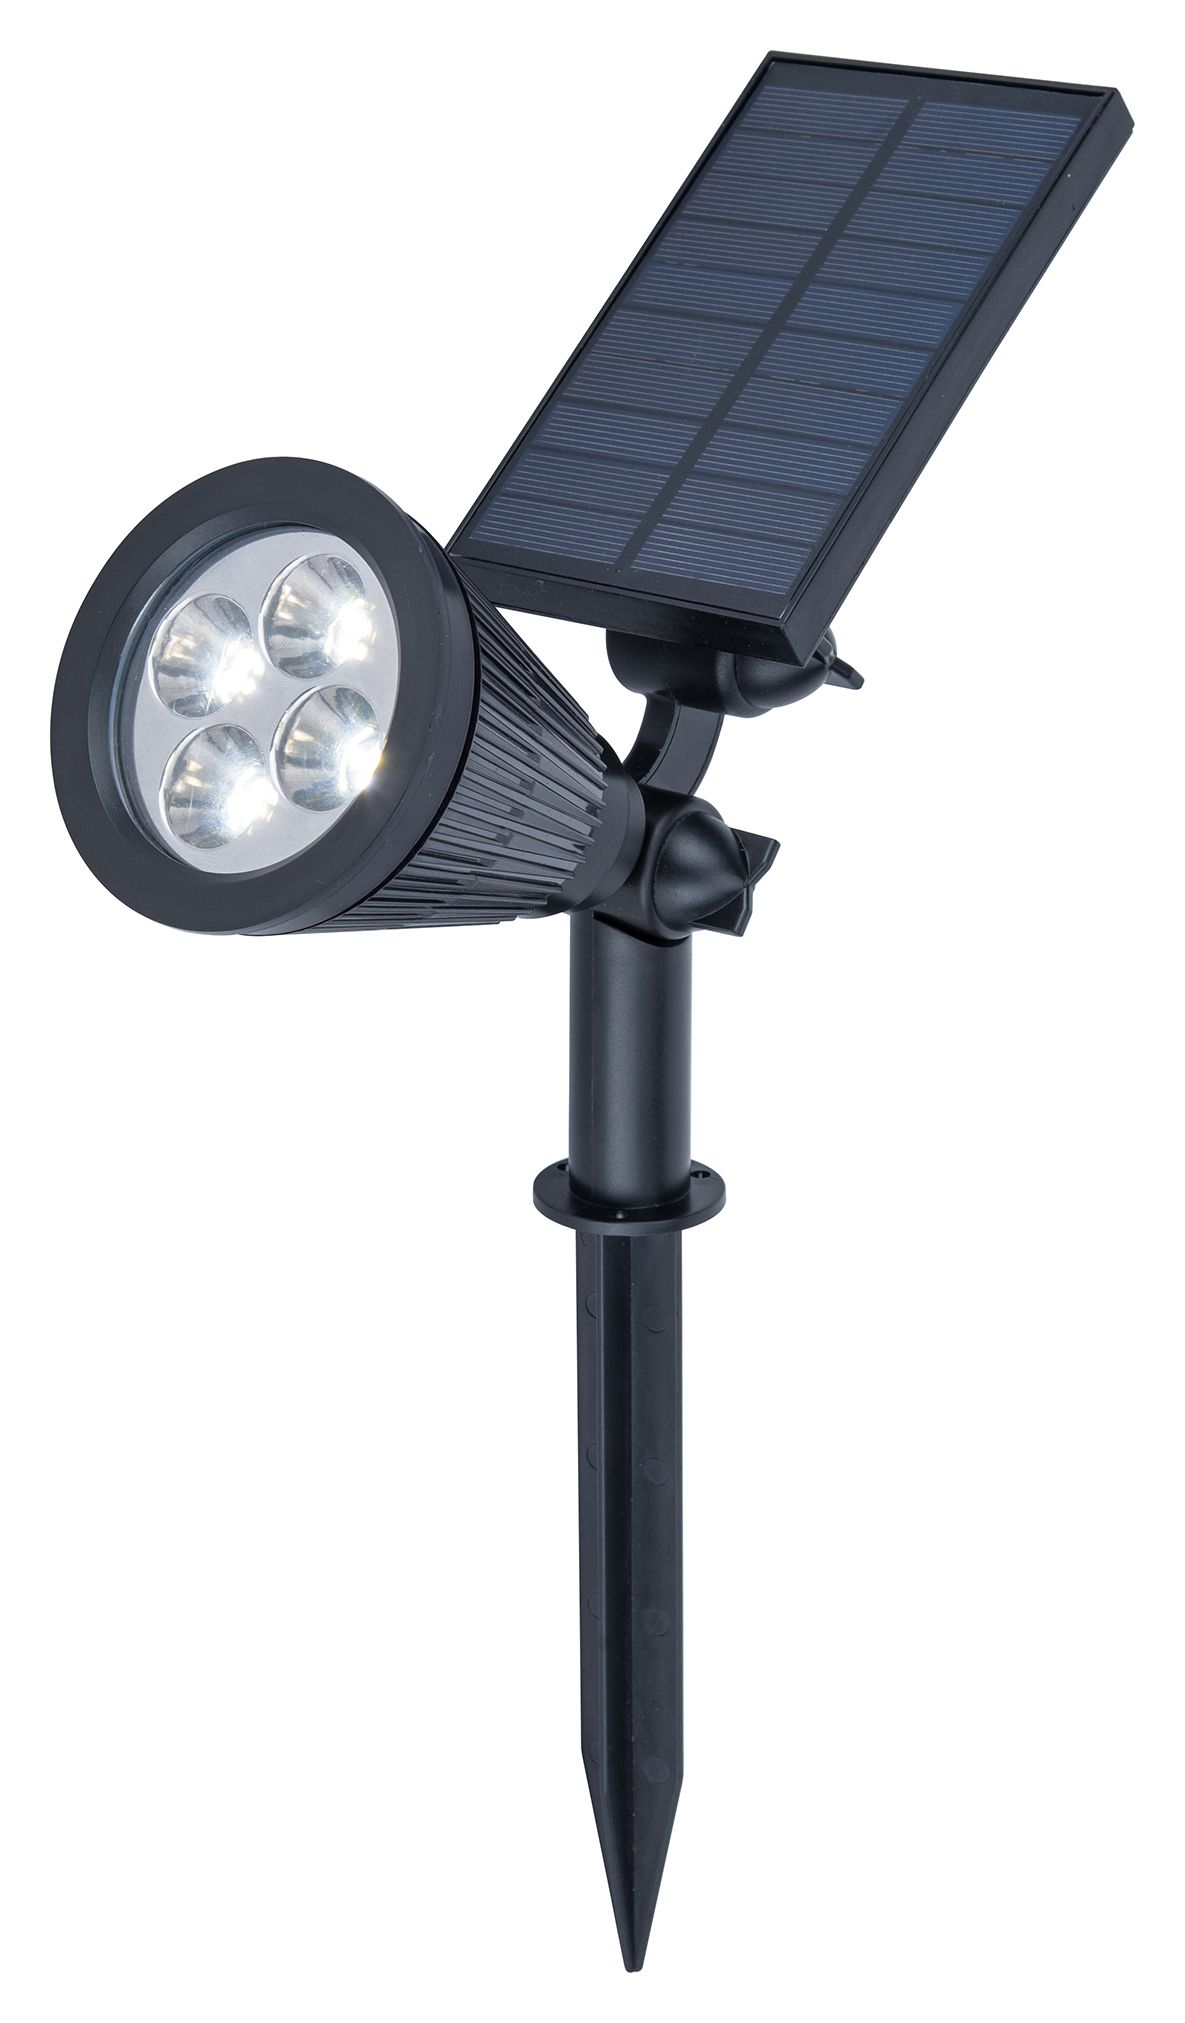 Image of Lutec Solar Superspot LED Outdoor Spike Light with Integrated Solar Panel